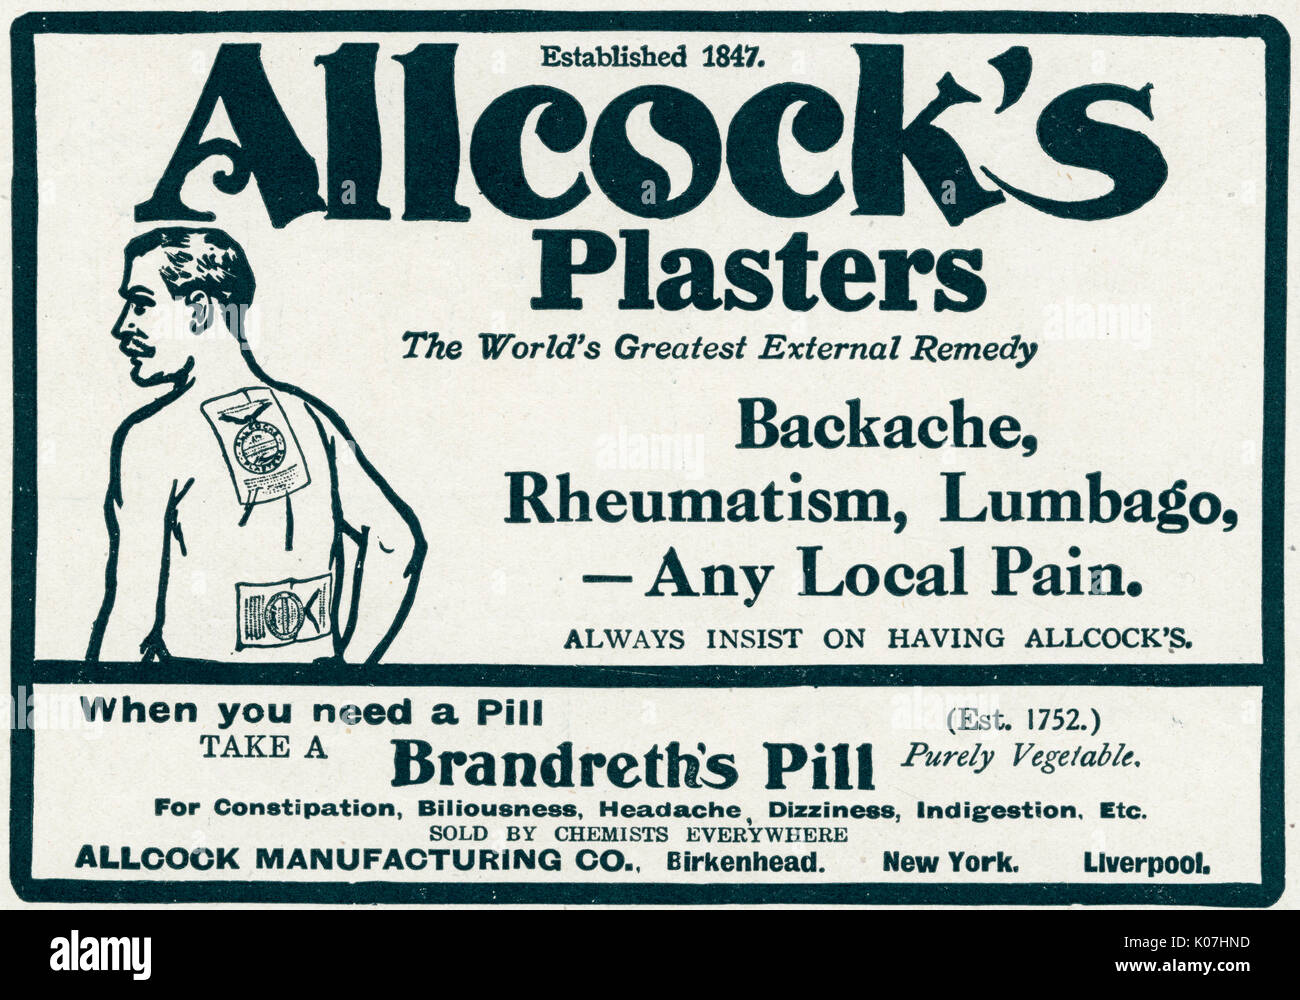 Allcock's Plasters for pain relief, backache, rheumatism, lumbago and ...